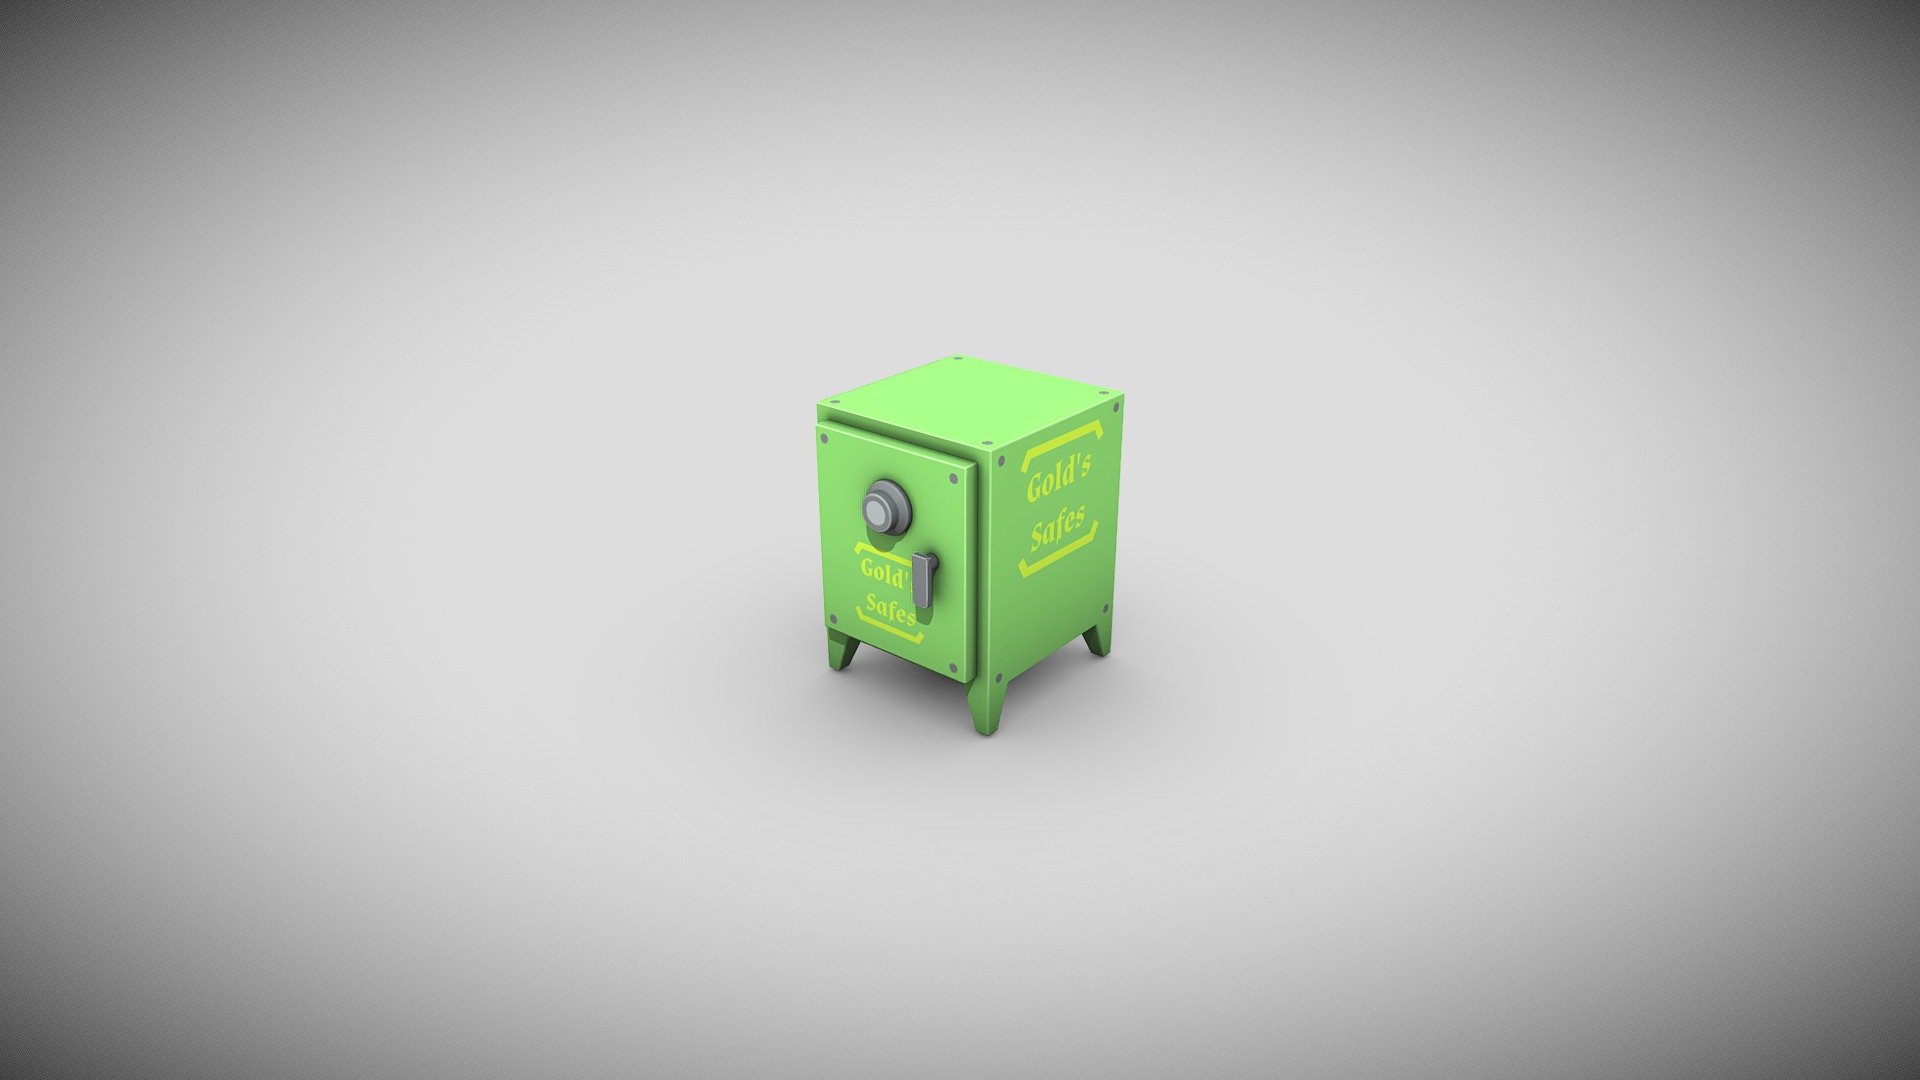 Asset from a game I'm developing 3d model